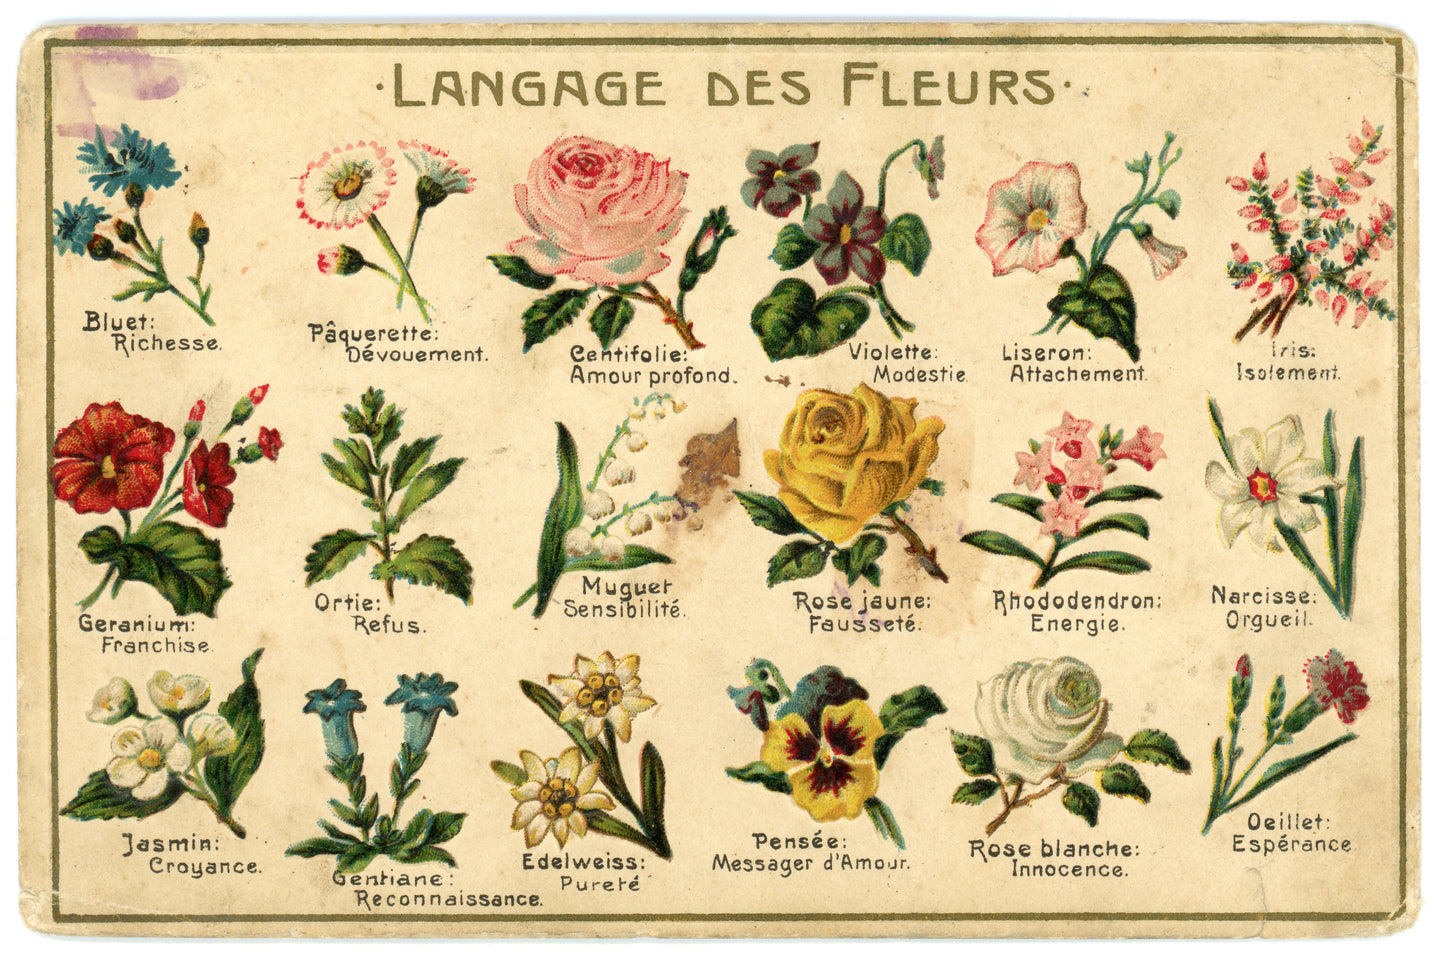 Language of flowers 18 different flowers represented